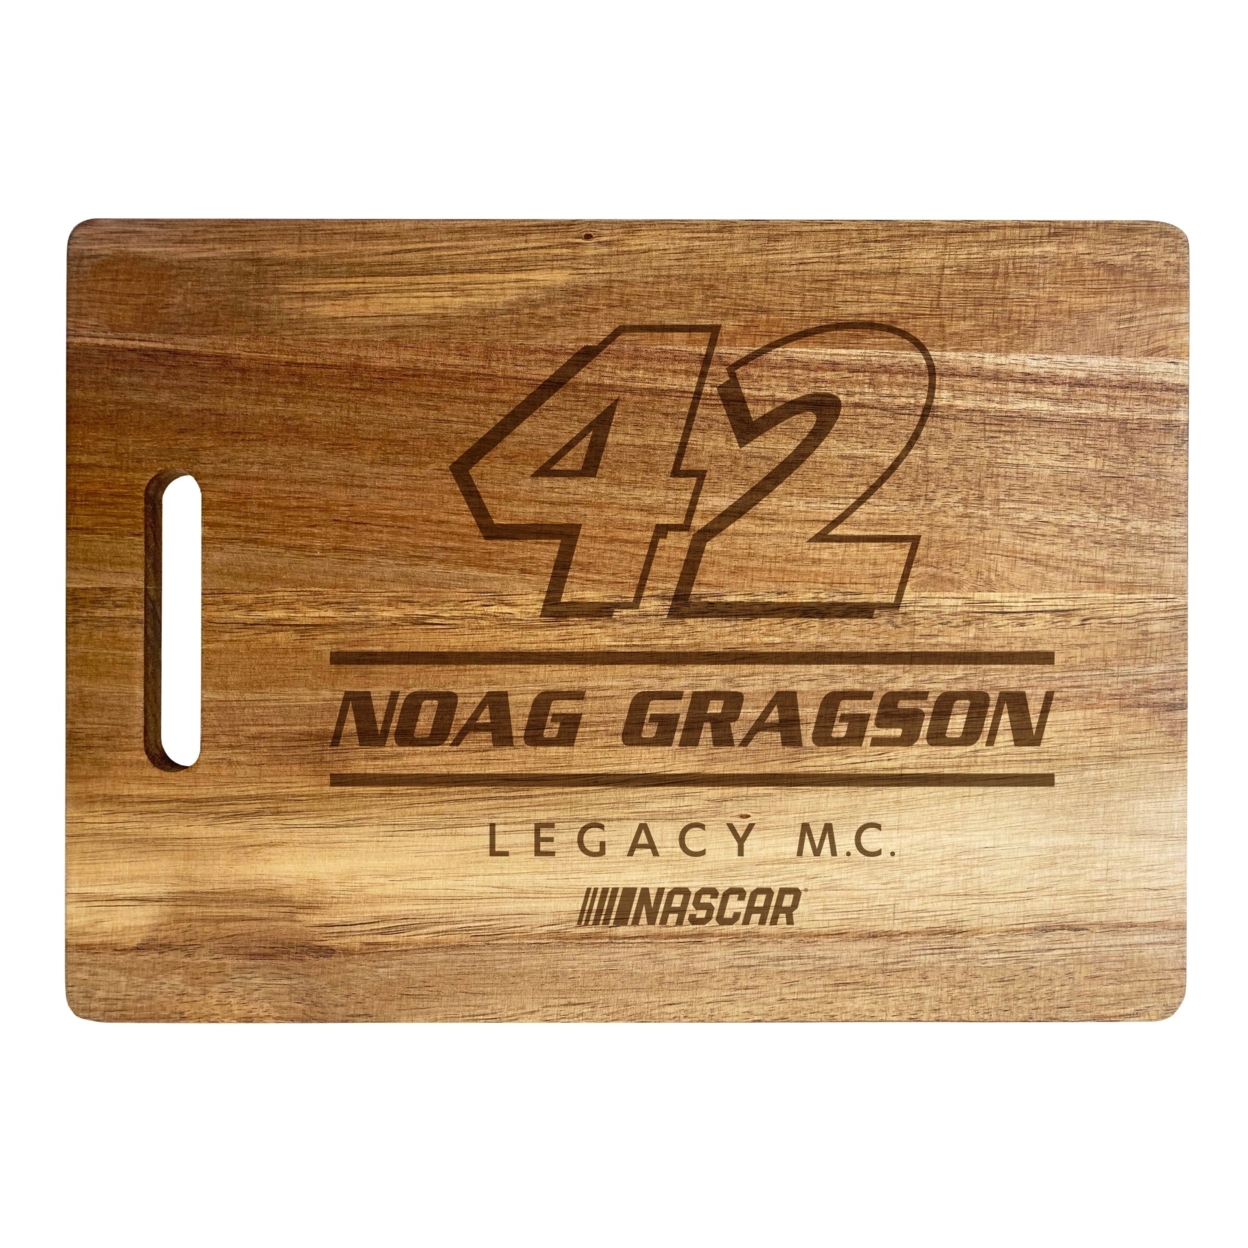 #42 Noah Gragson NASCAR Officially Licensed Engraved Wooden Cutting Board